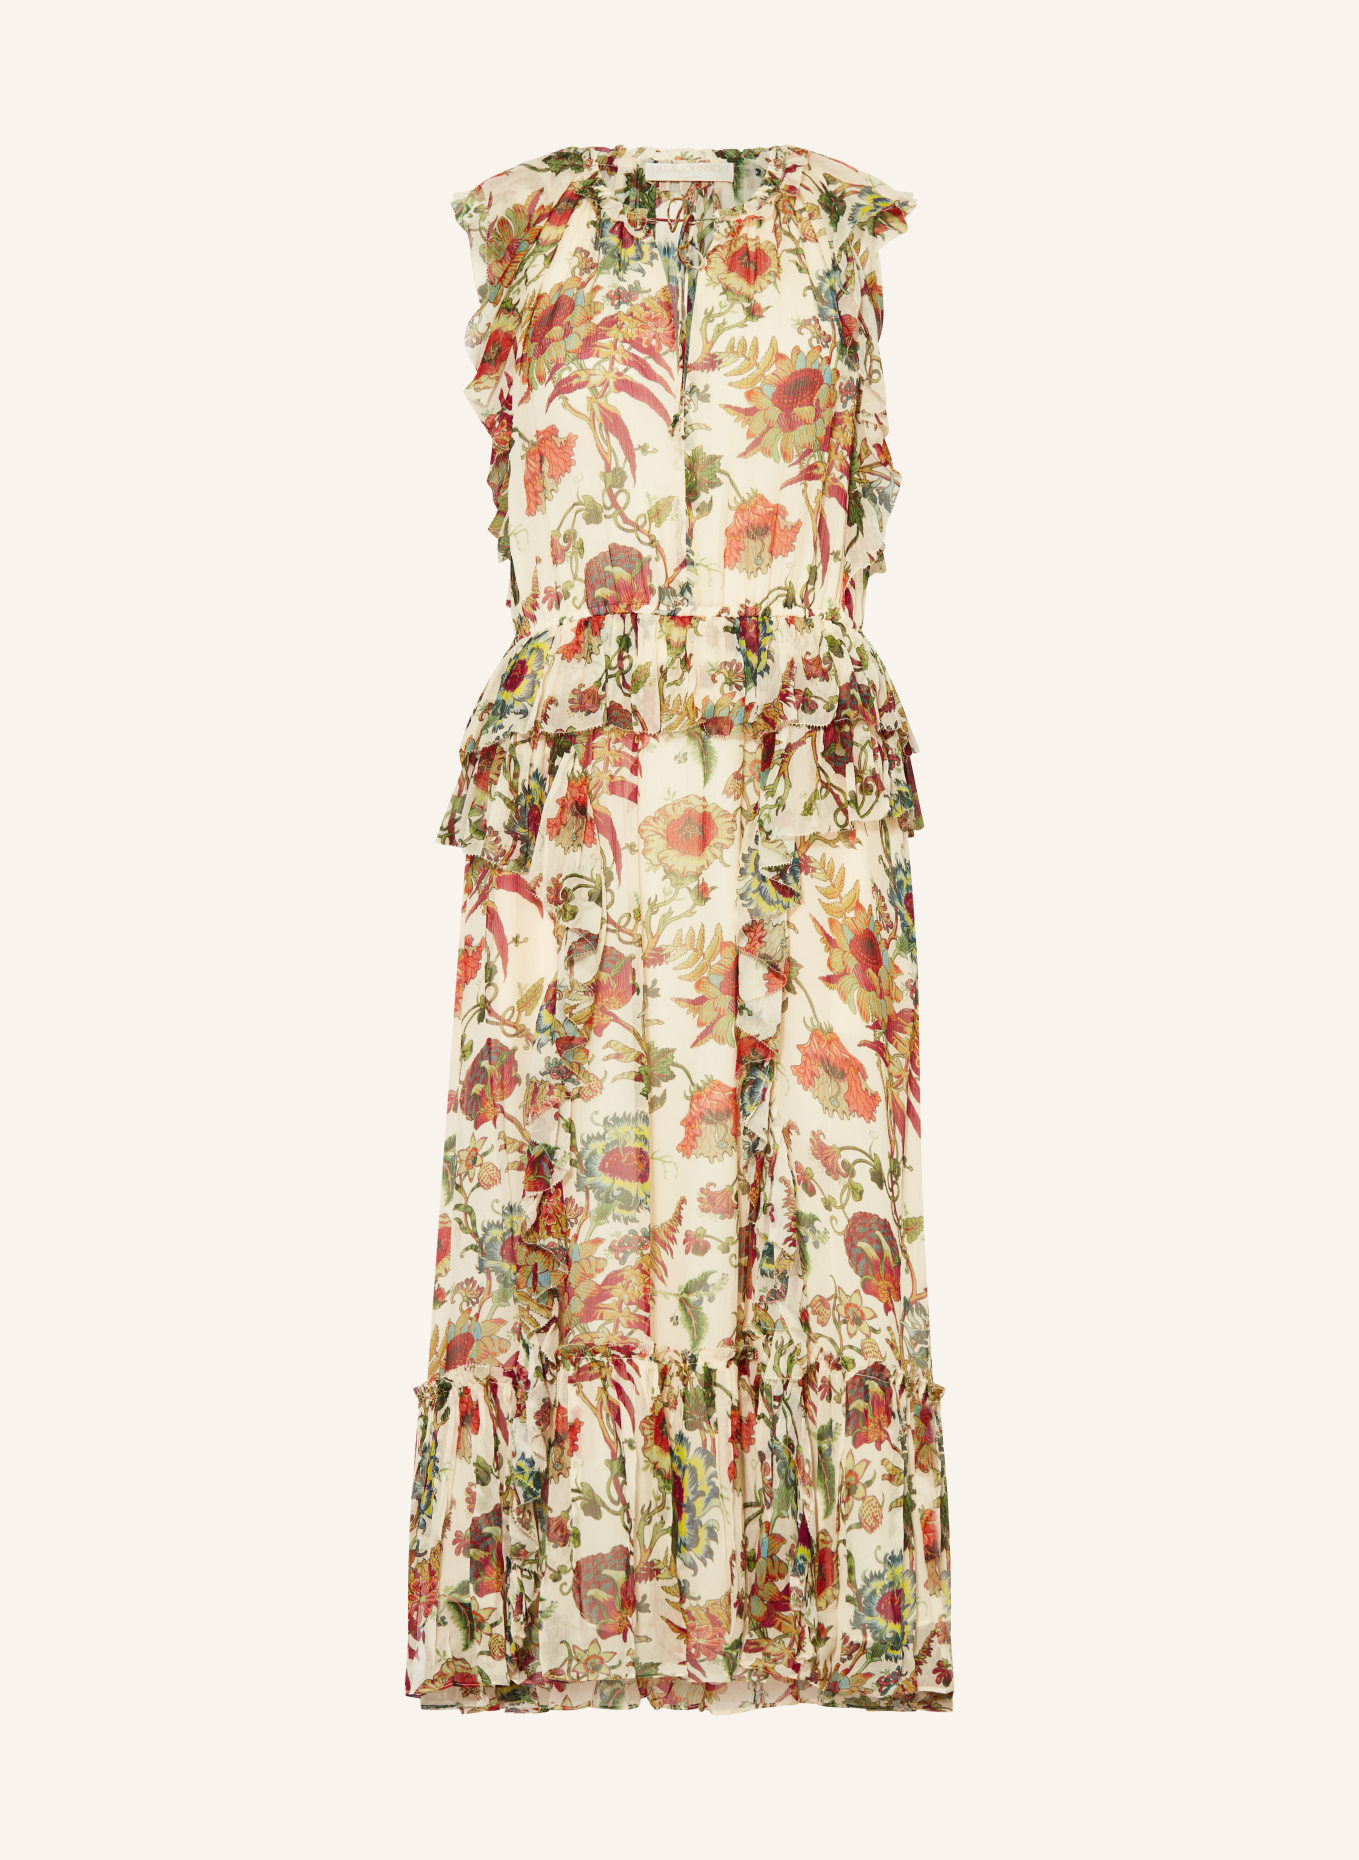 ULLA JOHNSON Silk dress ADRIENNE with ruffles, Color: LIGHT YELLOW/ DARK RED/ OLIVE (Image 1)